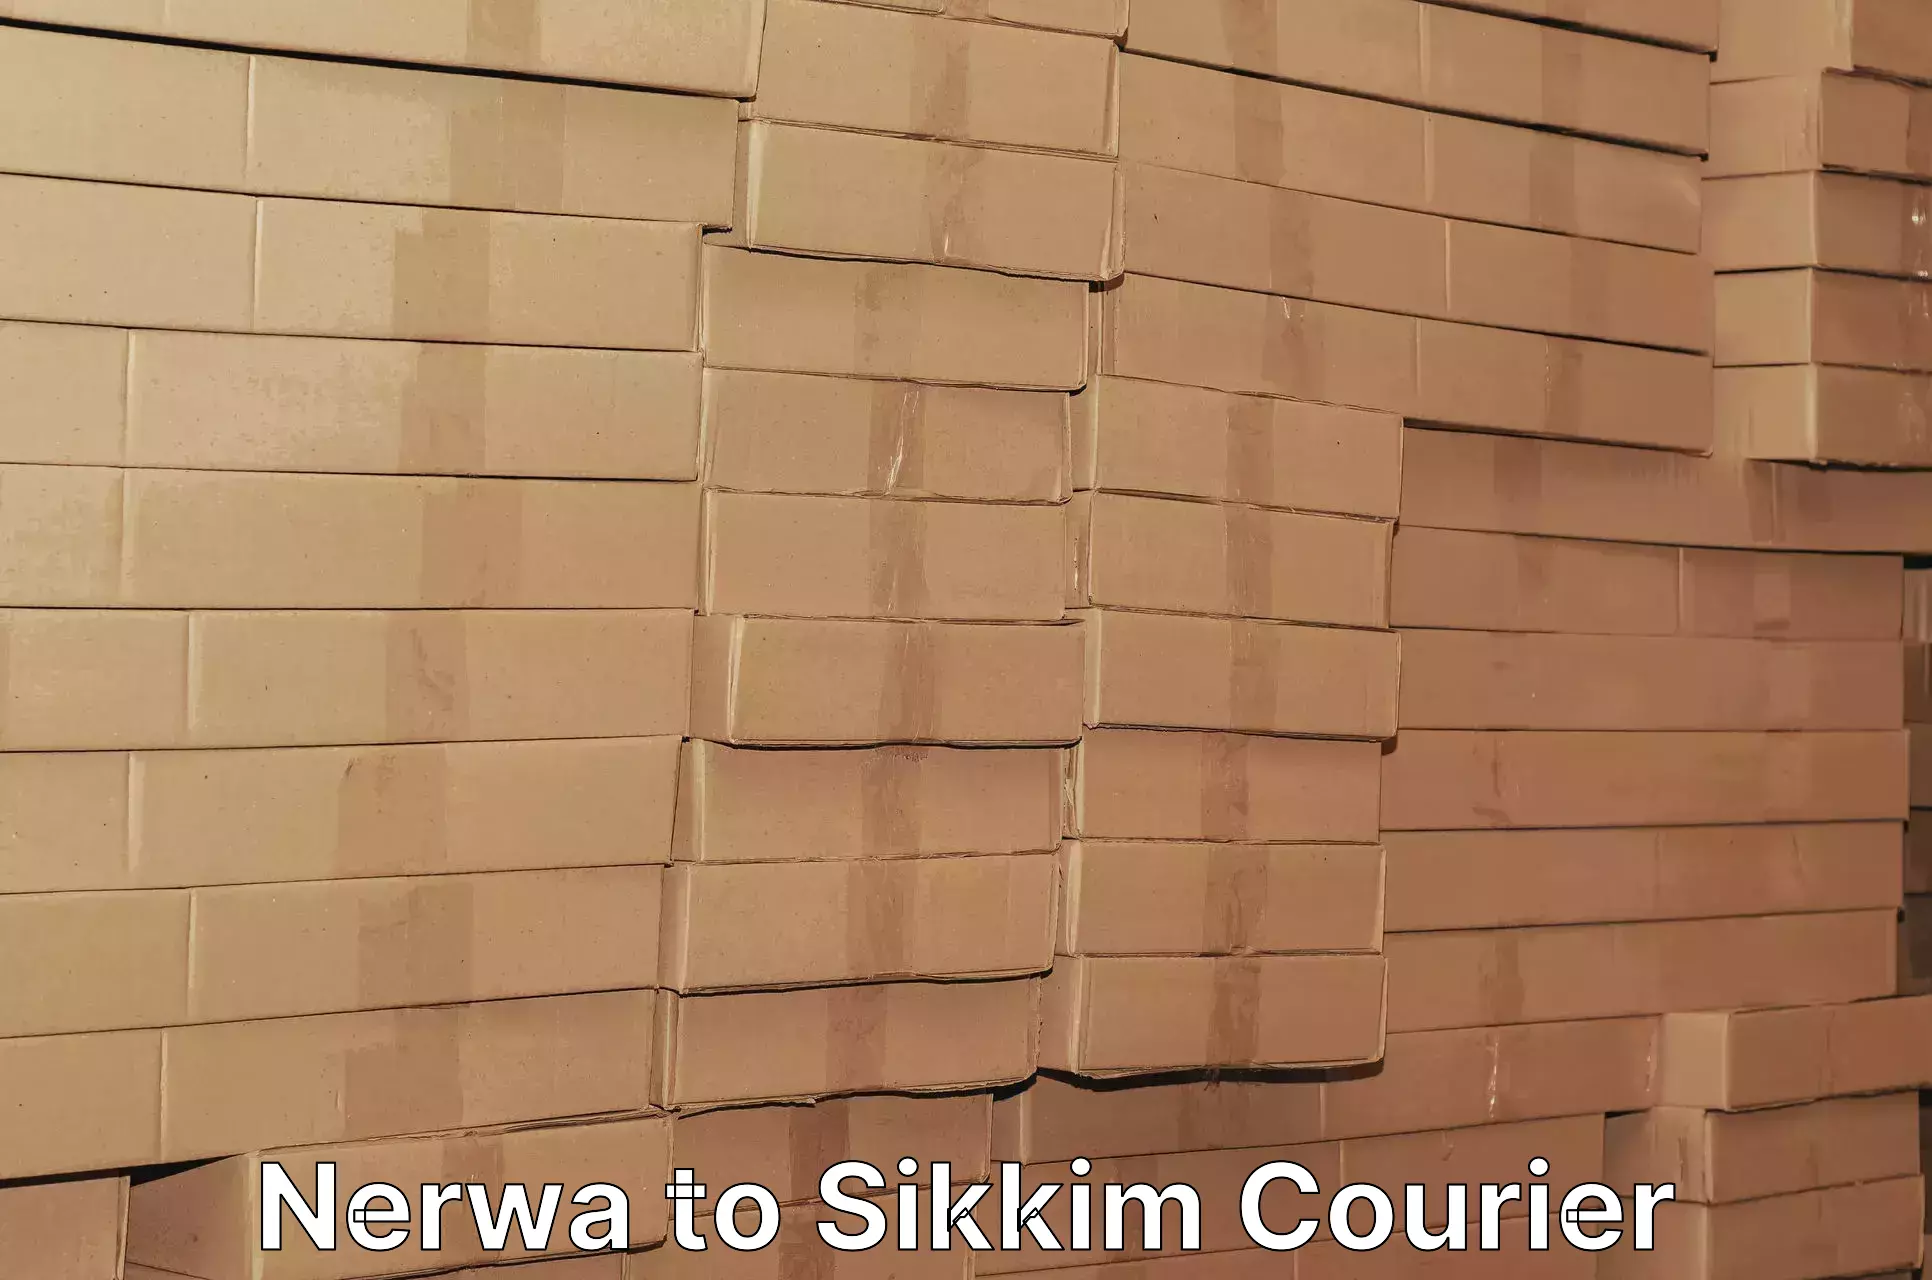 State-of-the-art courier technology Nerwa to Sikkim